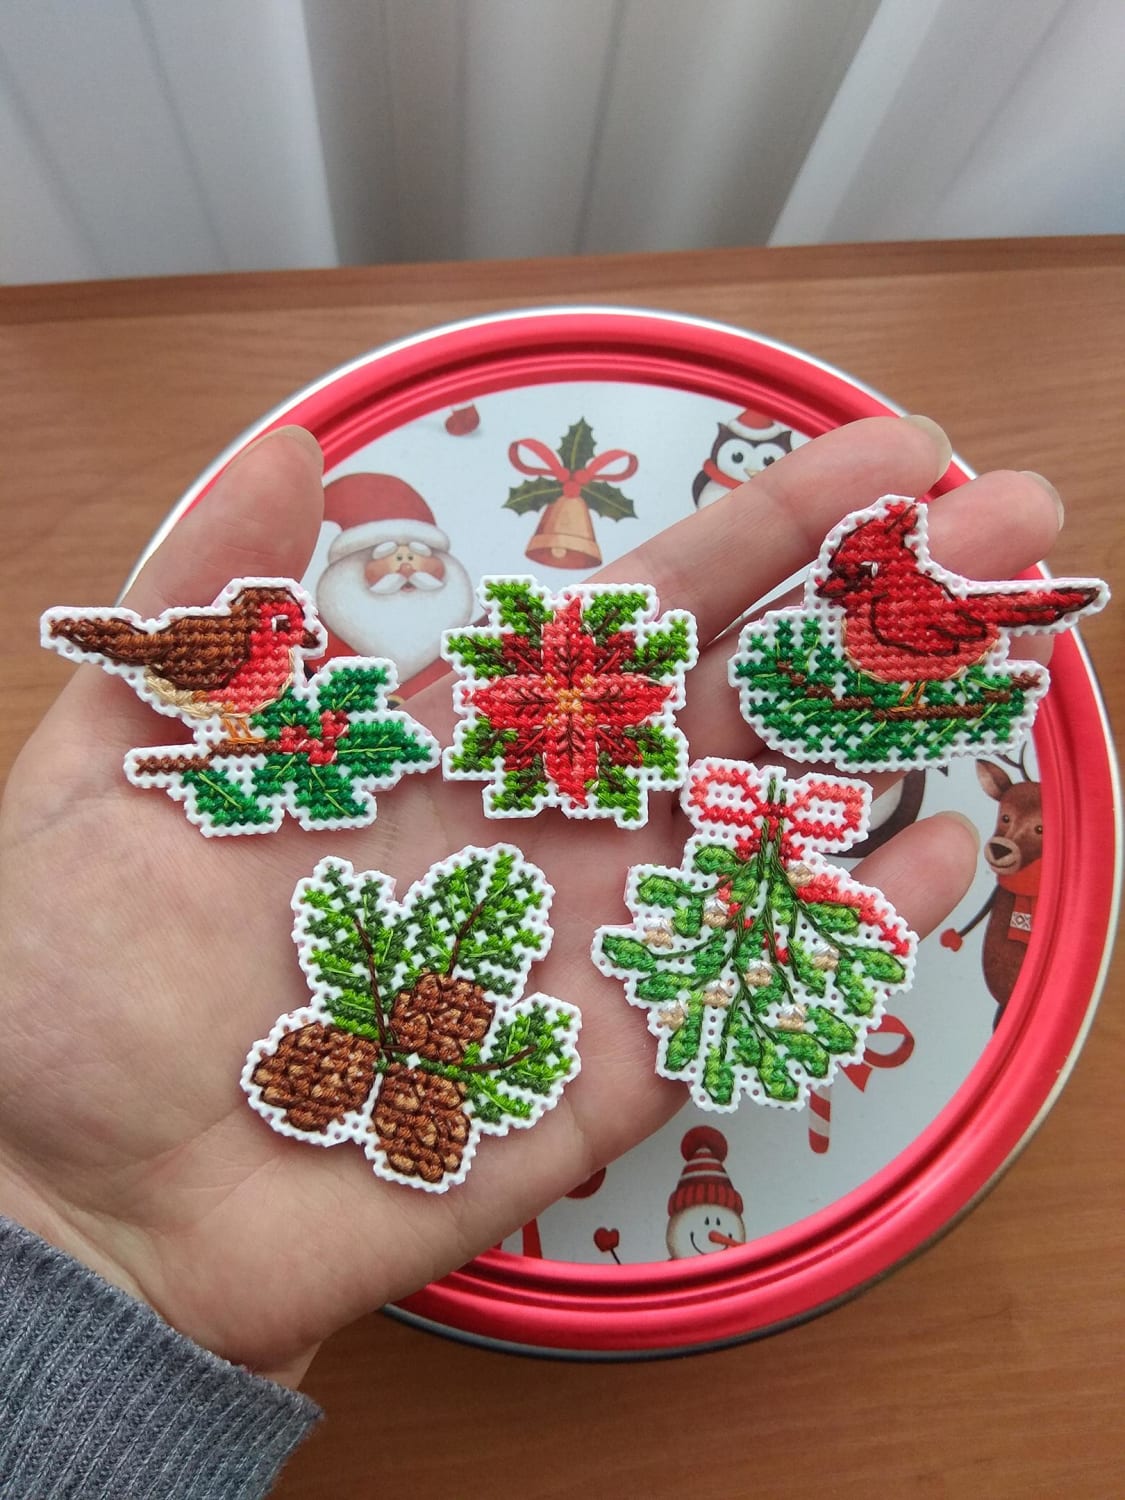 [FO] Finally, all 5 decorations are ready! Now I need to make a garland of them. Wish me good luck :)